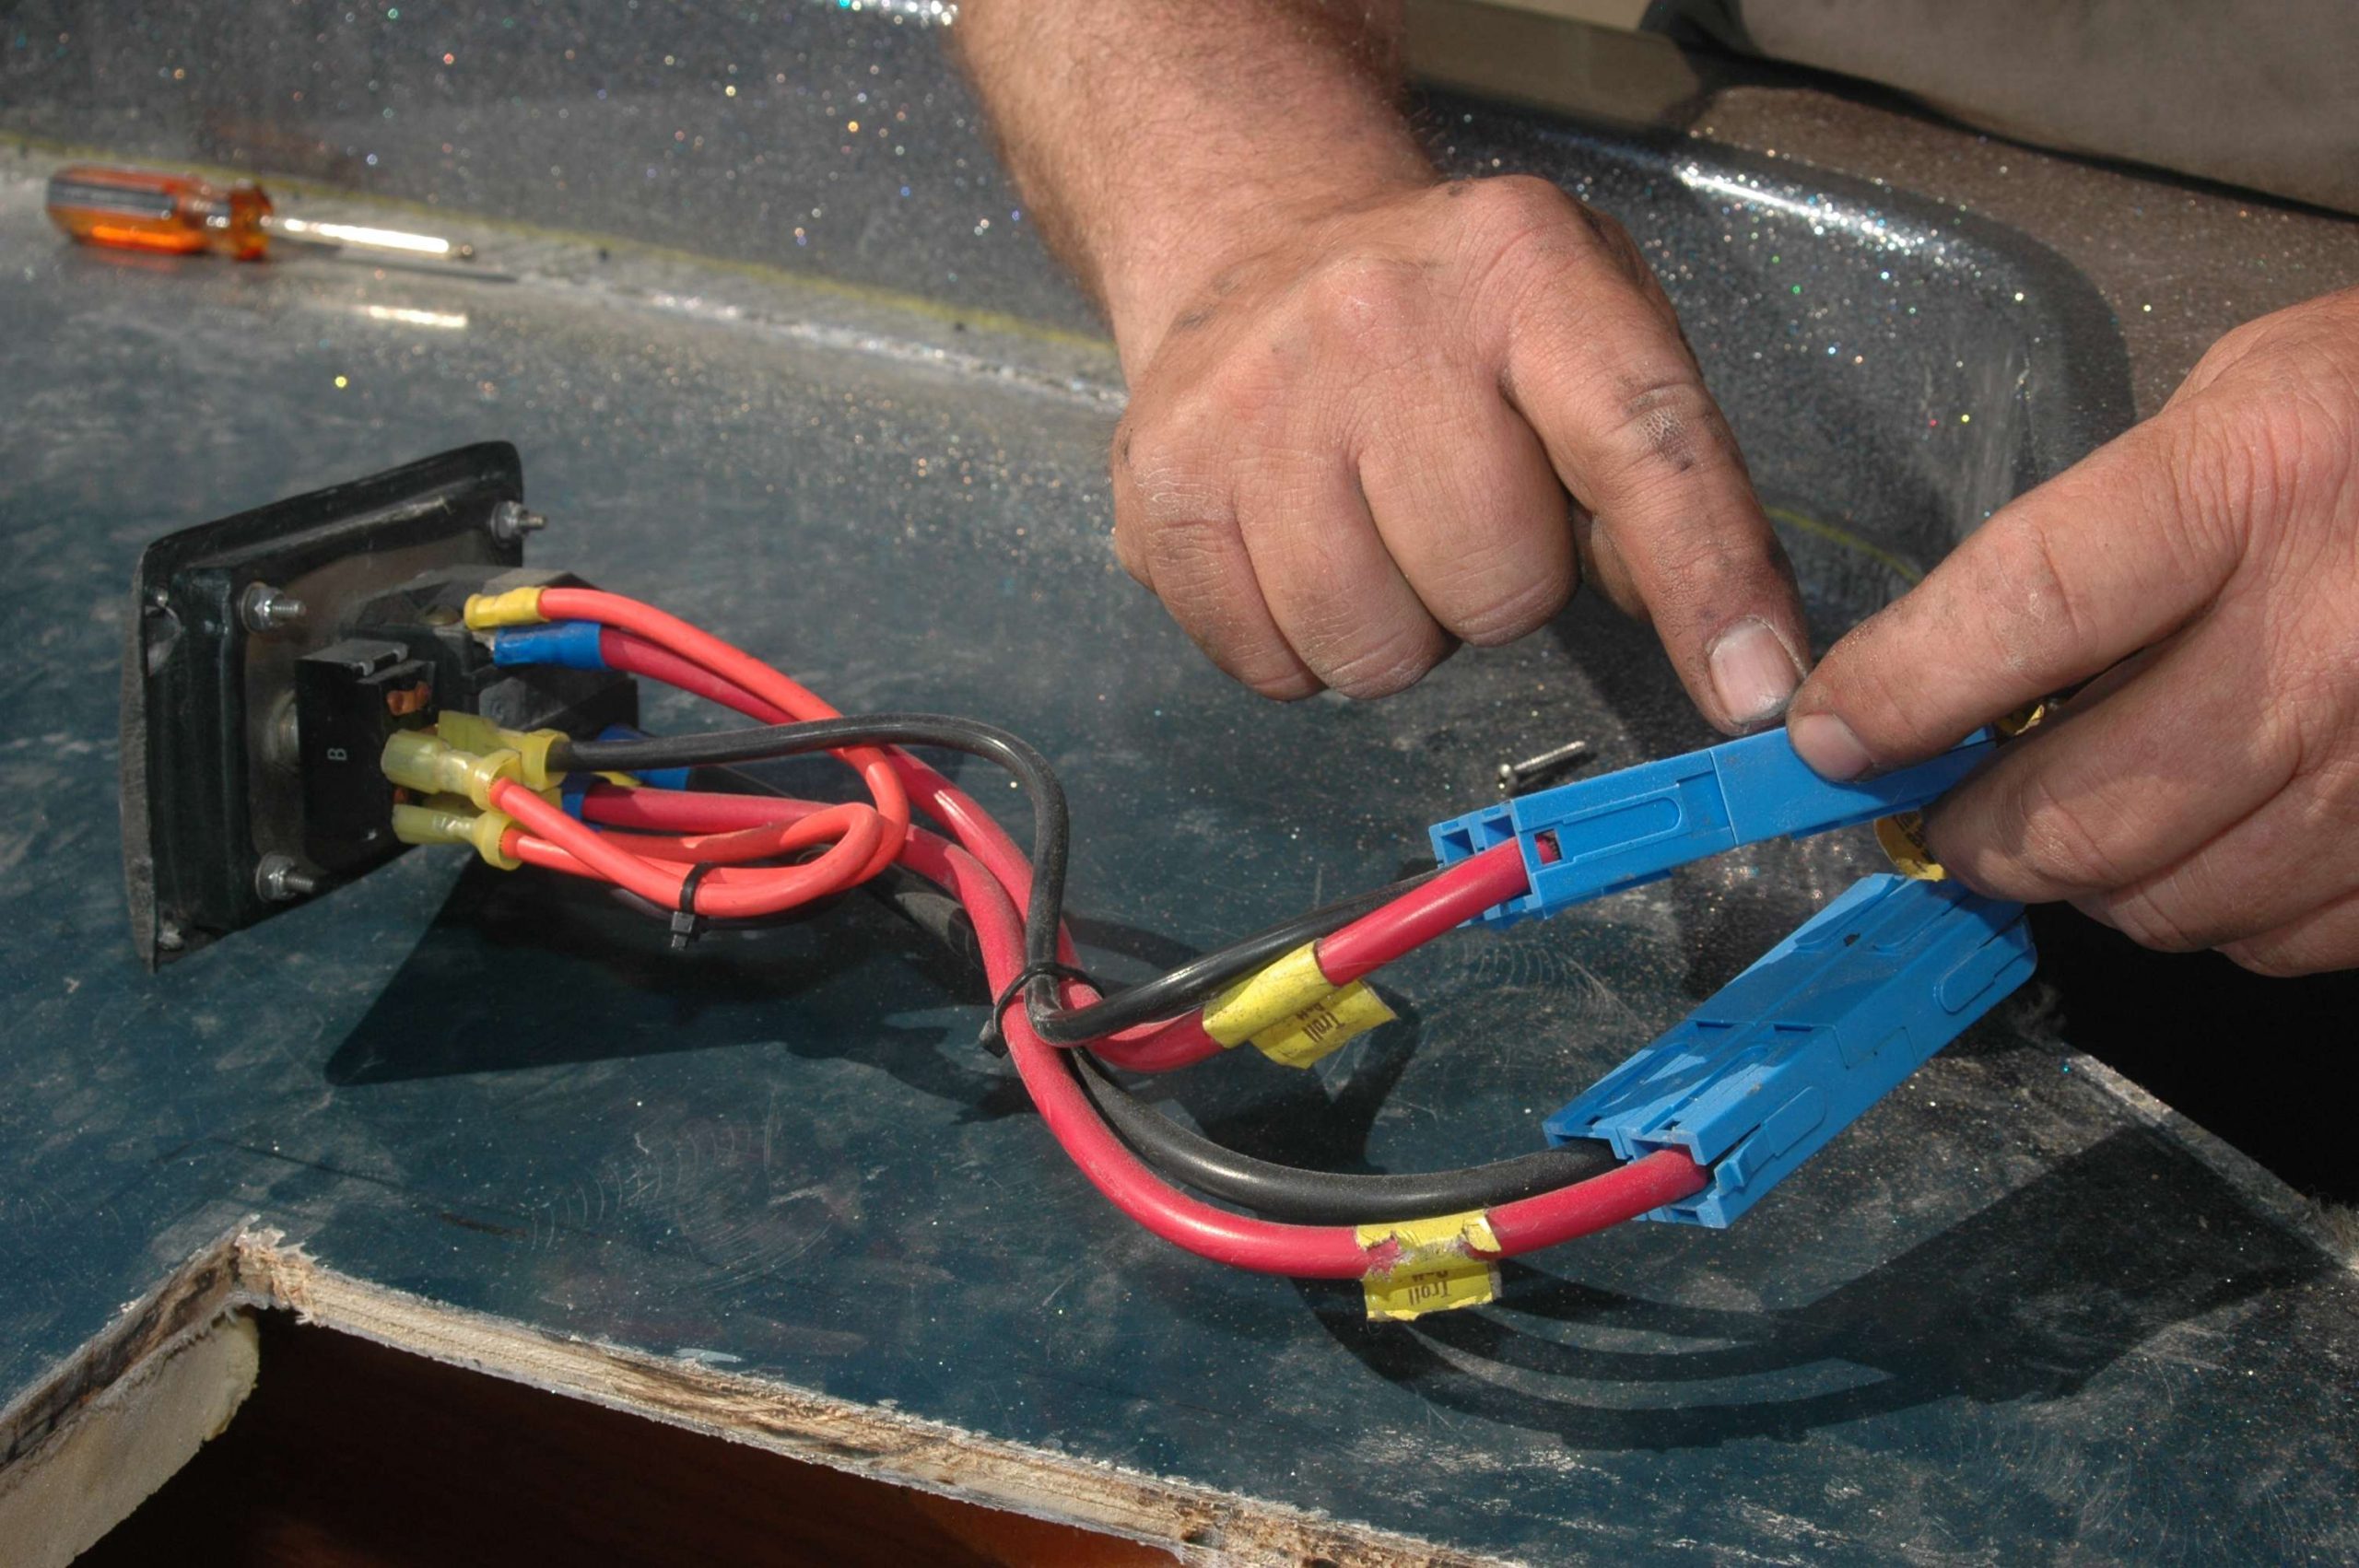 The 6-gauge wires are sufficient for 36 volts.